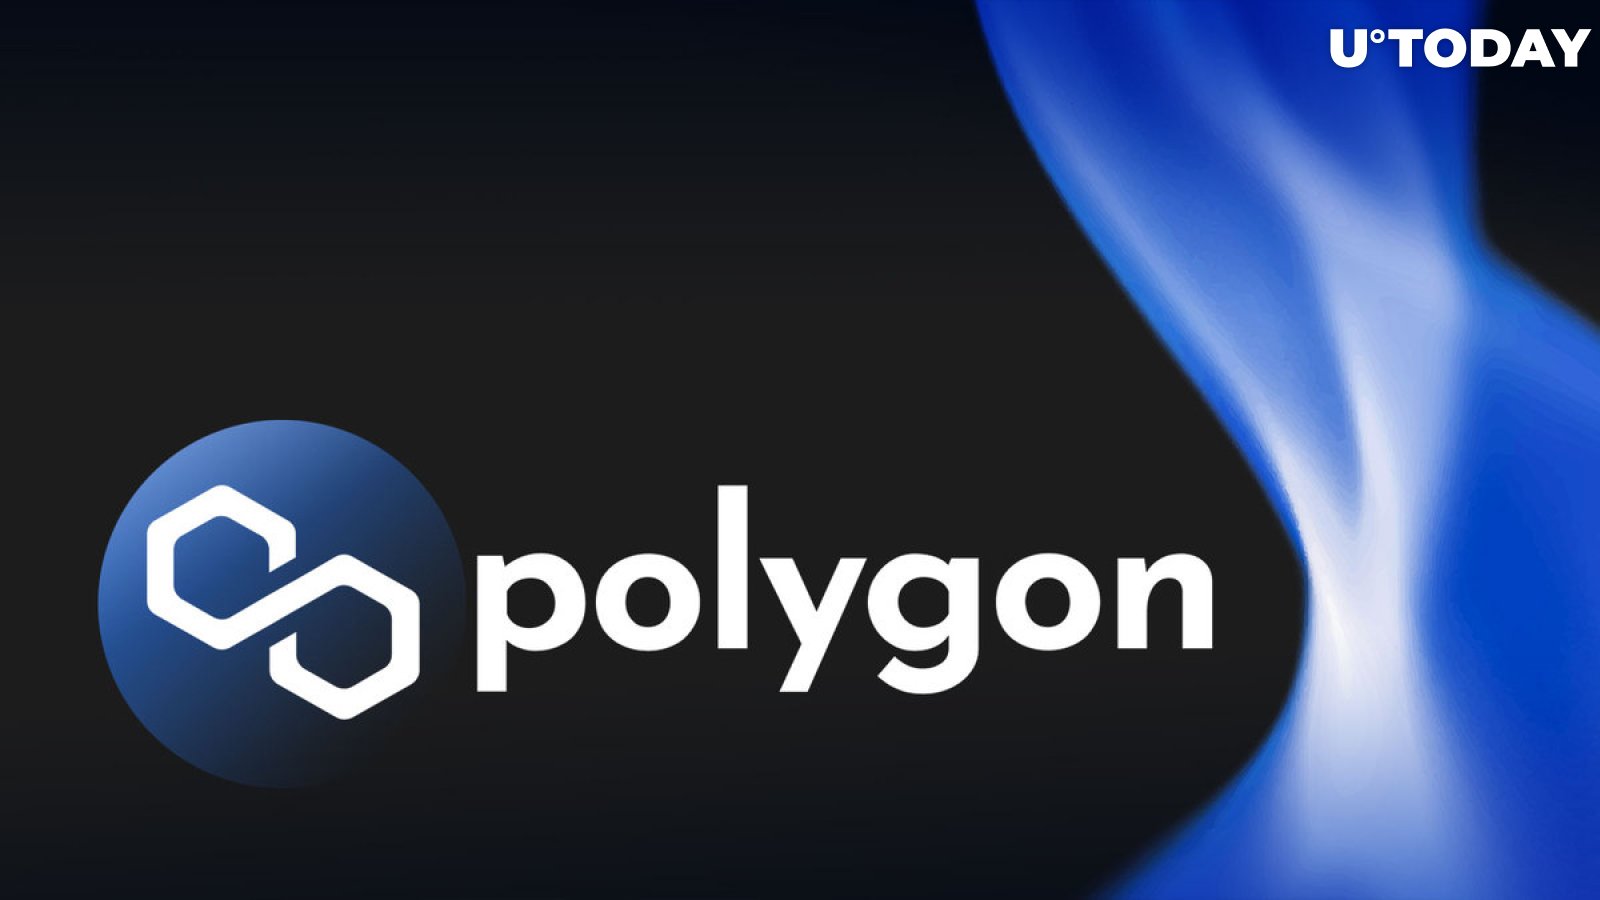 Polygon (MATIC) Shares Alternative Approach to Manage Gas Prices: Details